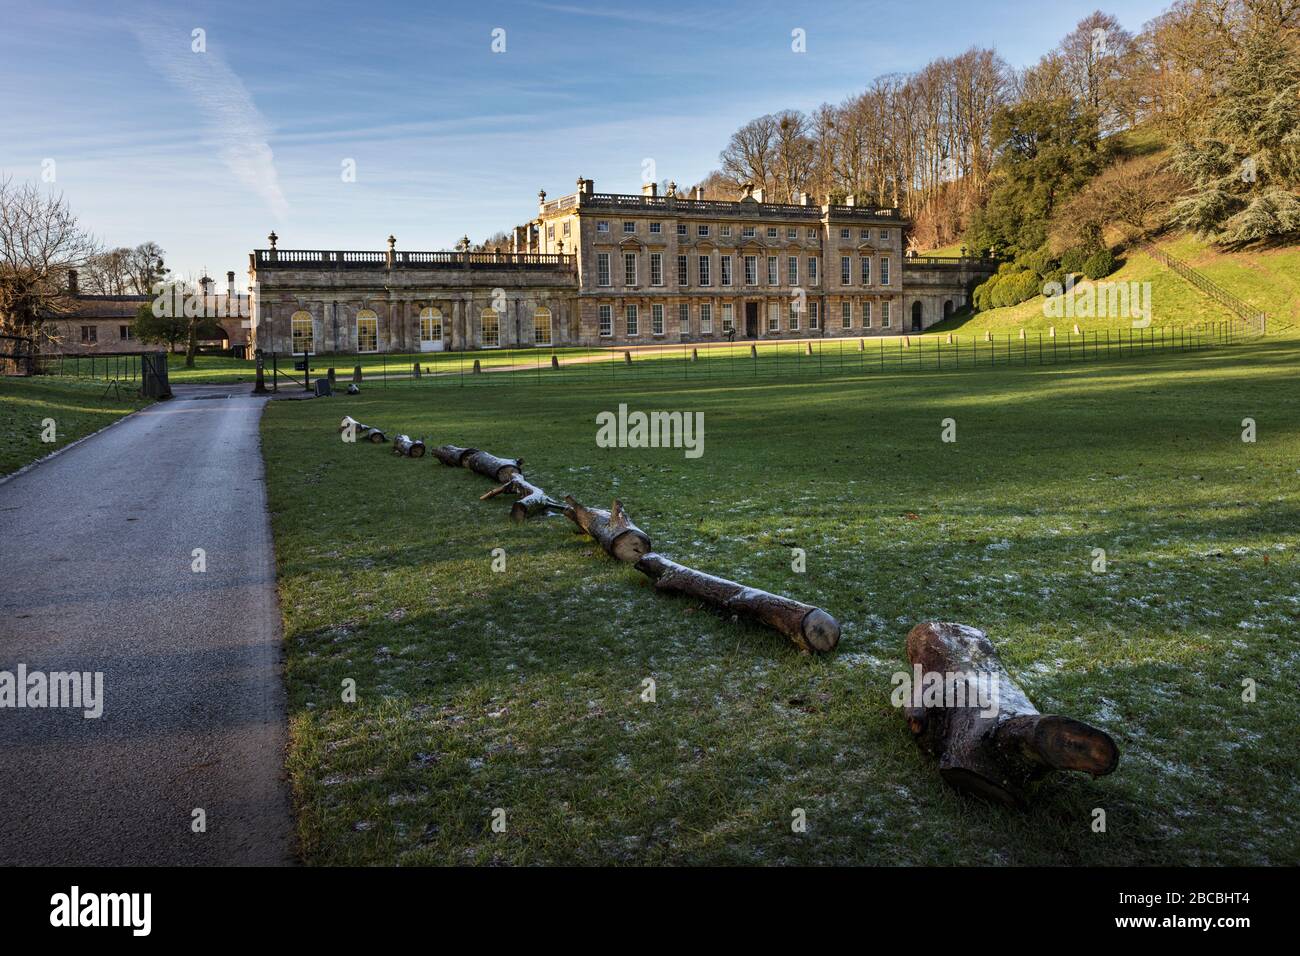 Dyrham Park is a baroque country house in a 270-acre ancient deer park near the village of Dyrham in South Gloucestershire. A National Trust Property Stock Photo